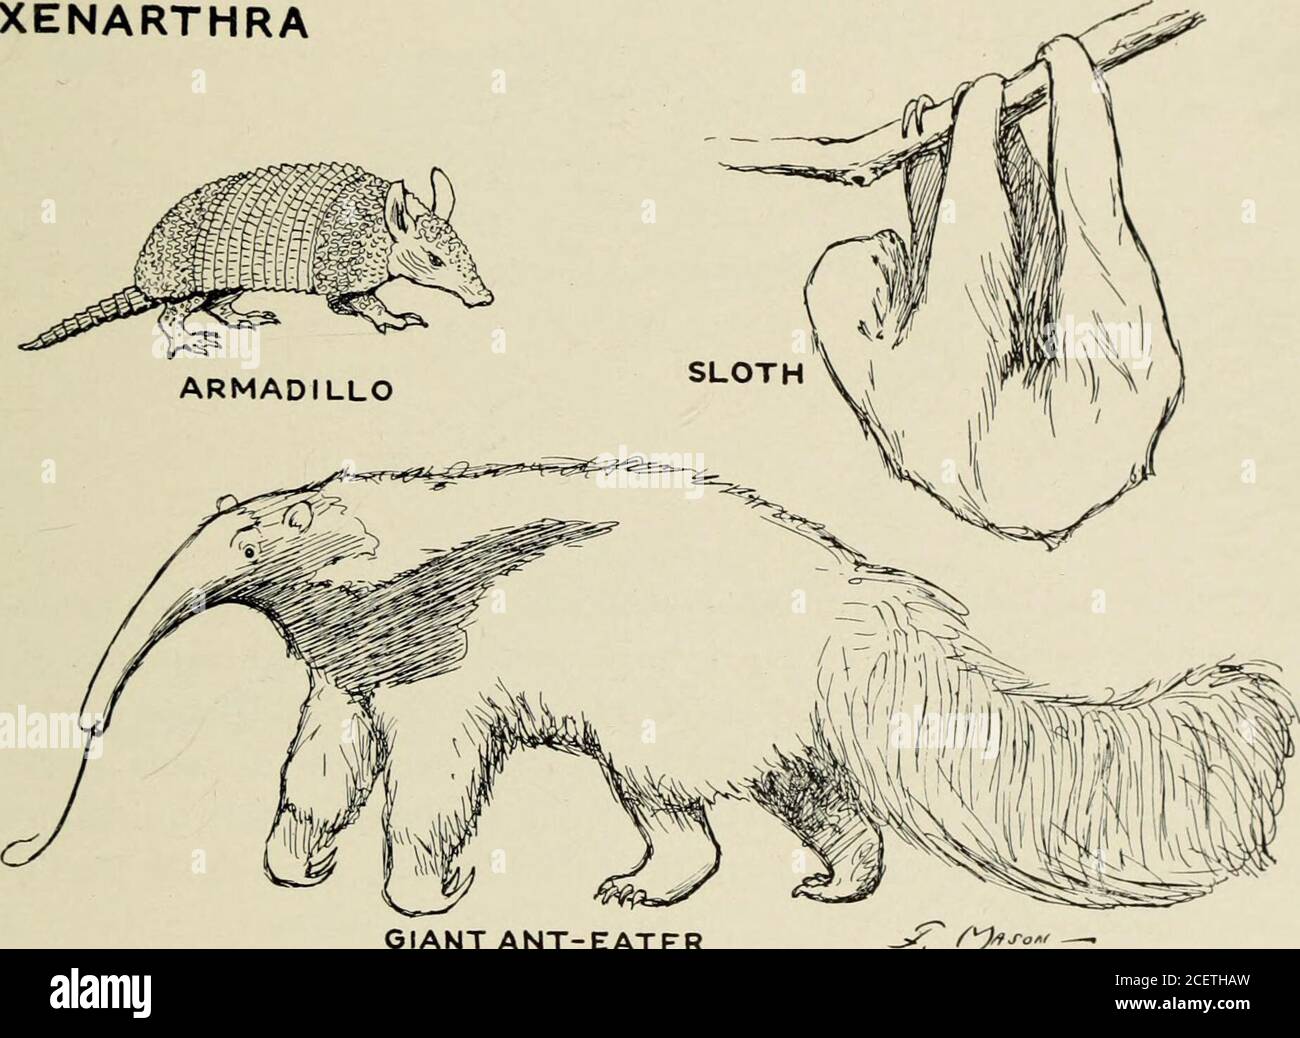 . Guide leaflet. from the fore-runners of the ungulates andthat the early tube-toothed termite eaters followed an evolutionarycourse not dissimilar to that of the hyraxes. HIOLOUY OF MAMMALS 19 Xenarthra. American edentates. (16, 50). The anteater.s, slothsand arniacUllos, though all related, externally have little in common.In spite of the fact that they are called edentates, only the anteuters aretruly toothless. The anteaters have long heads which accommodate thc^ long stickytongue with which they catch ants. The giant anteater or ant-bear(50) of South America, the largest of the order, att Stock Photo